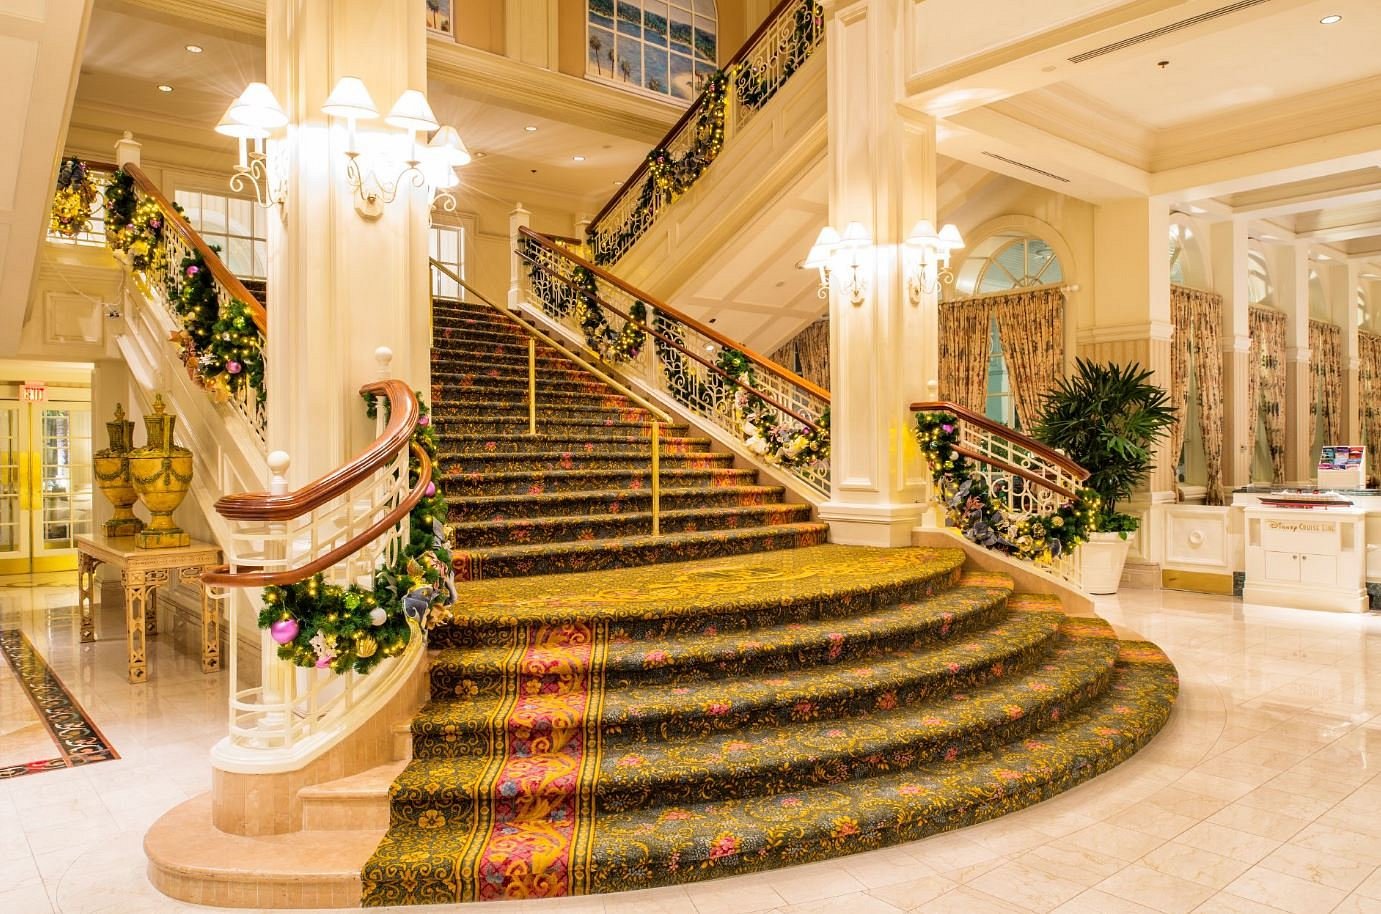 The grand staircase inside the Grand Floridian 